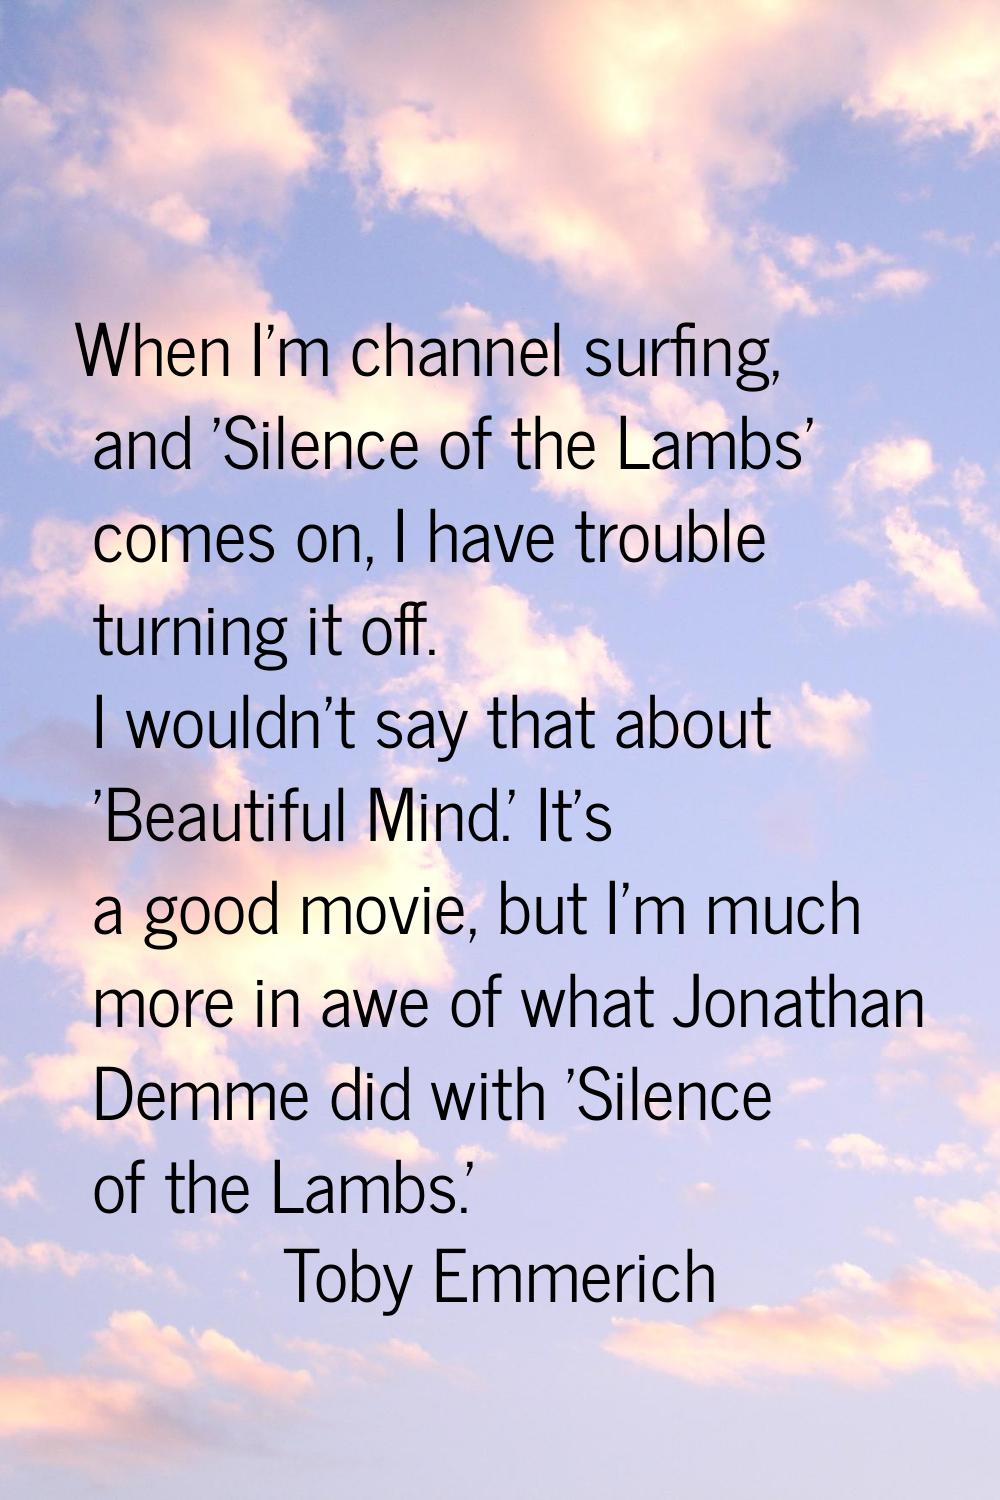 When I'm channel surfing, and 'Silence of the Lambs' comes on, I have trouble turning it off. I wou